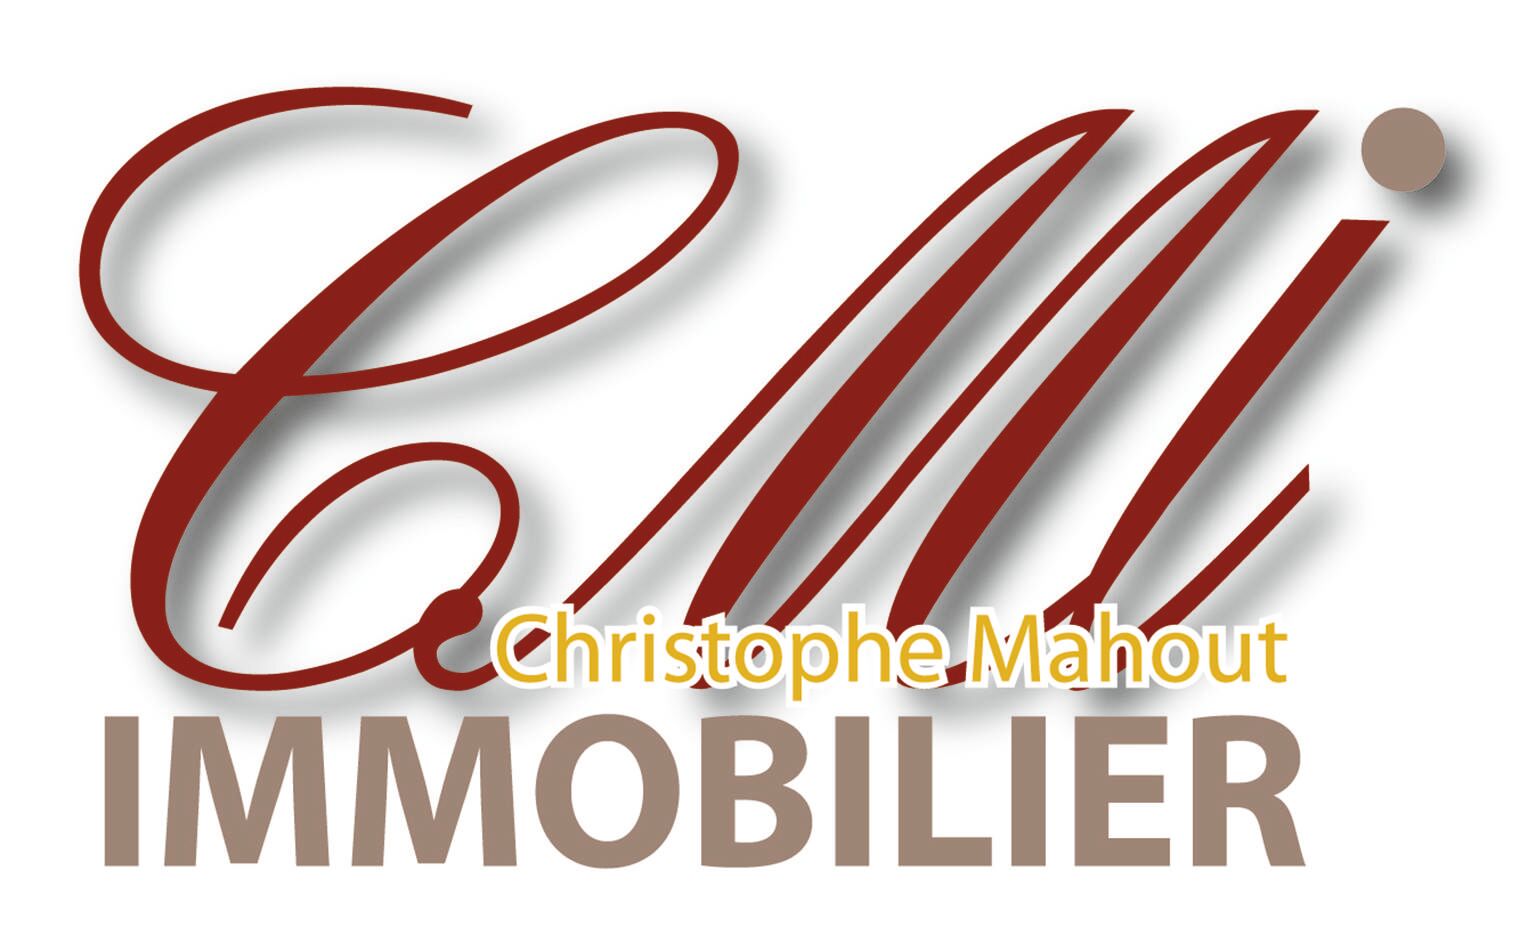 Logo Christophe Mahout Immobilier